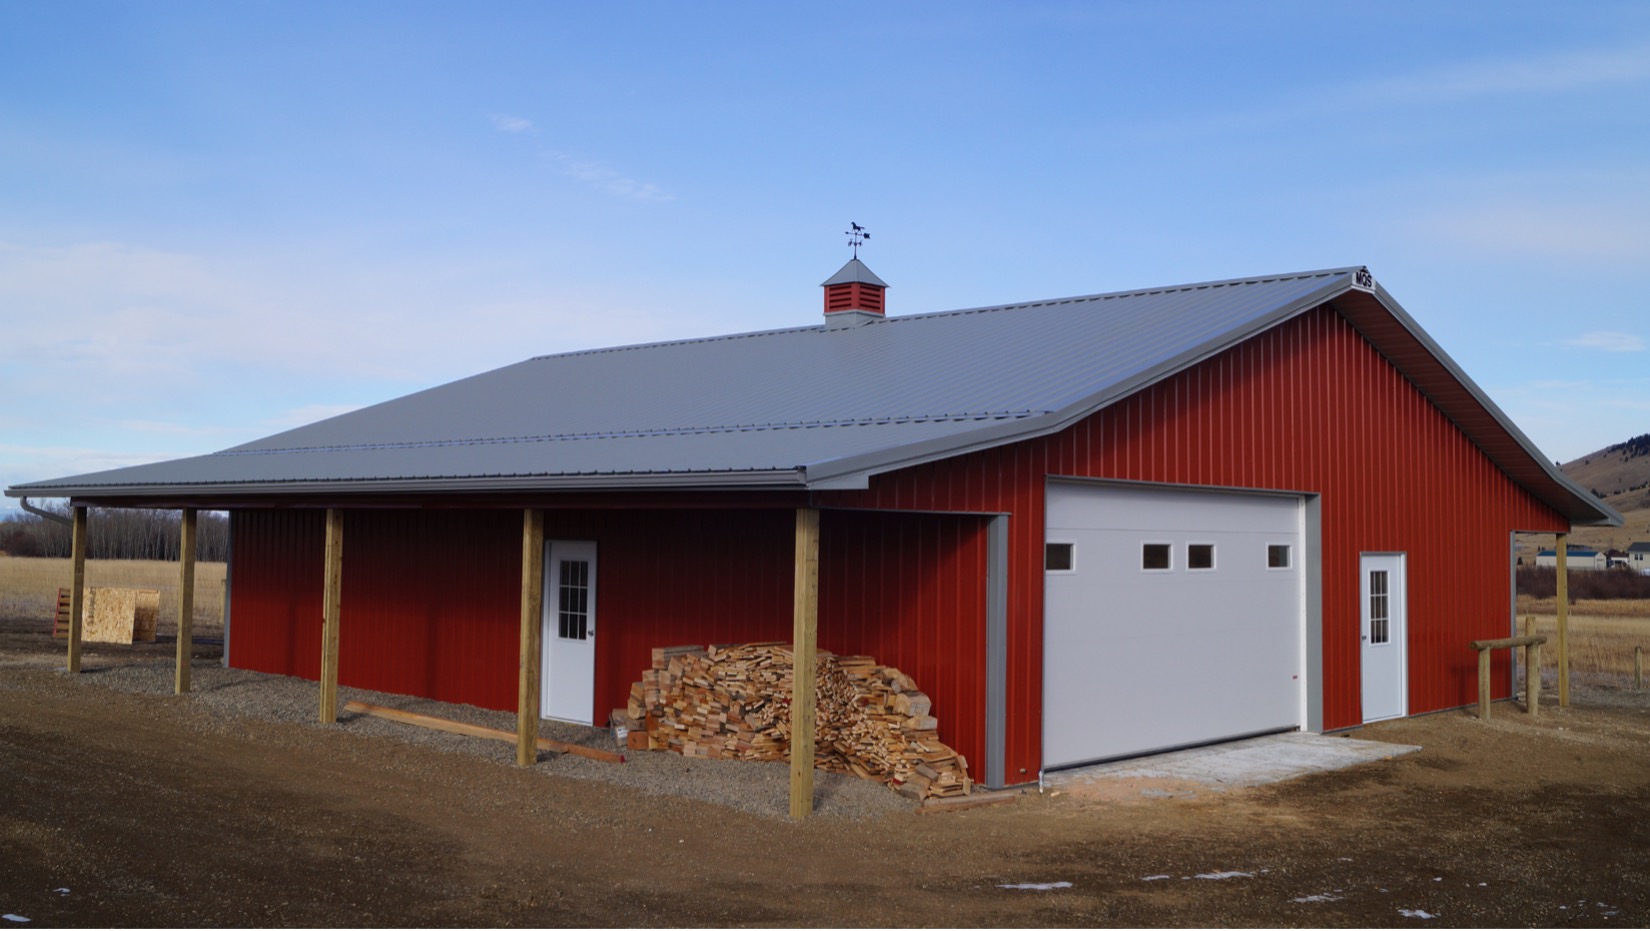 8 Tips for Building Attractive Agricultural Buildings in Spokane